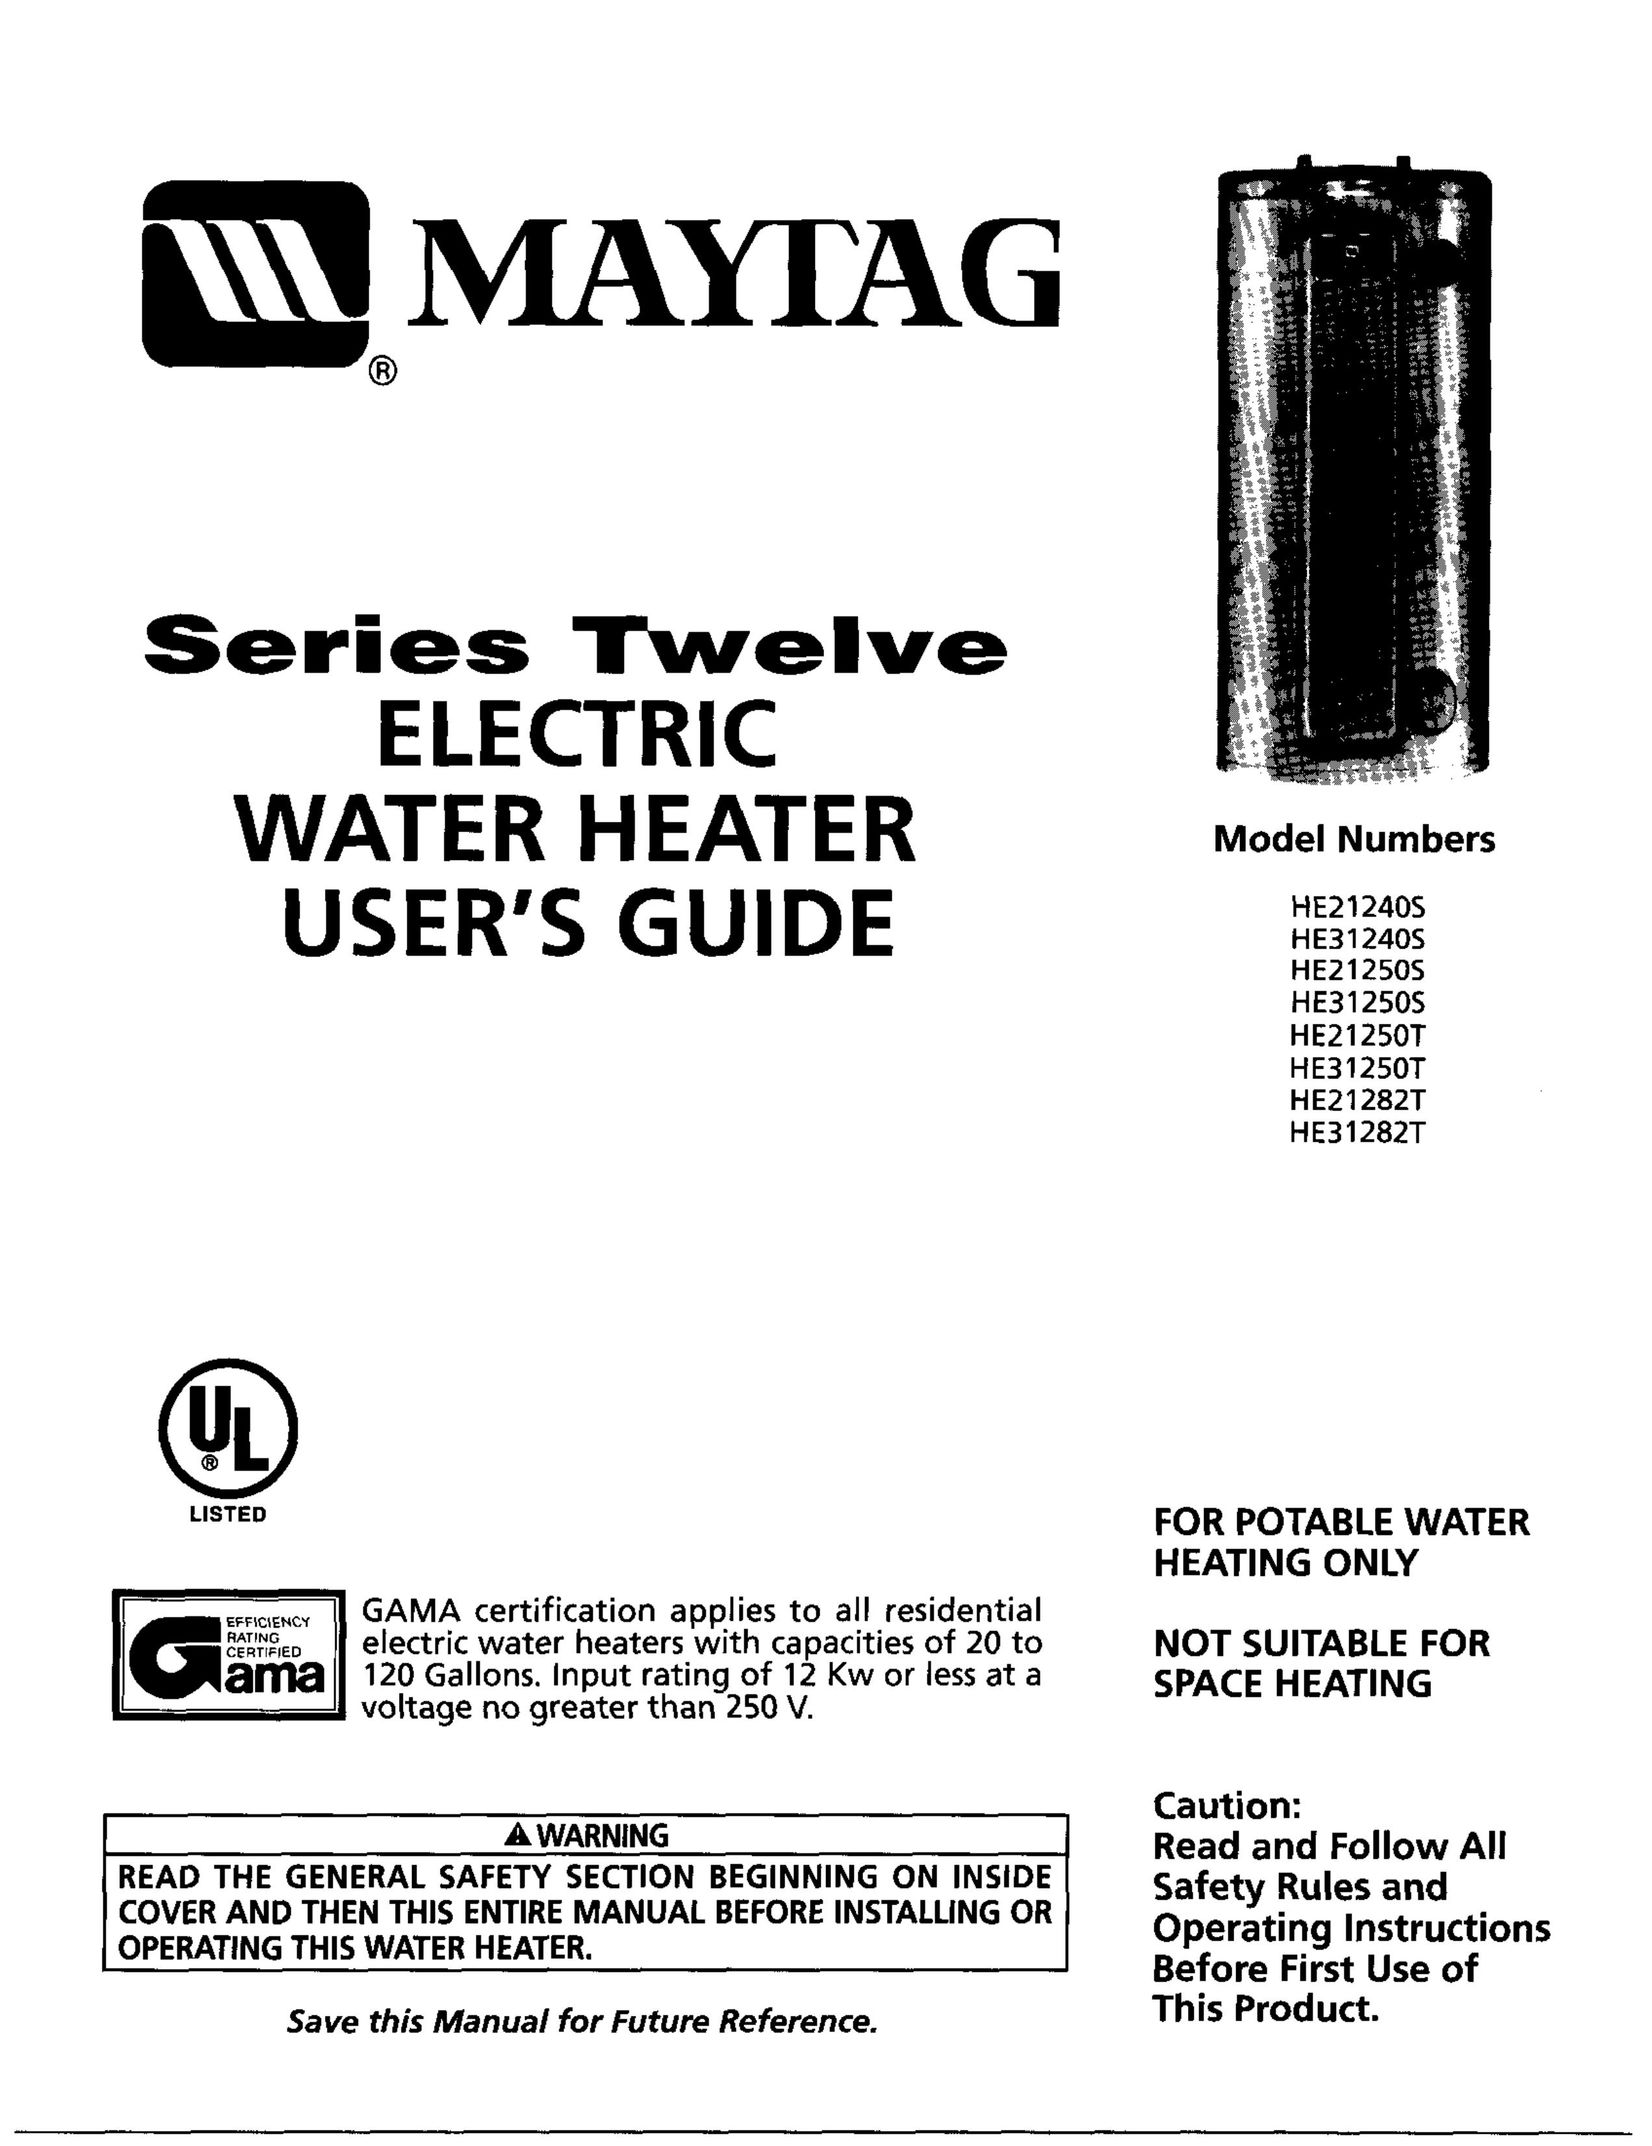 Maytag HE31250T Water Heater User Manual